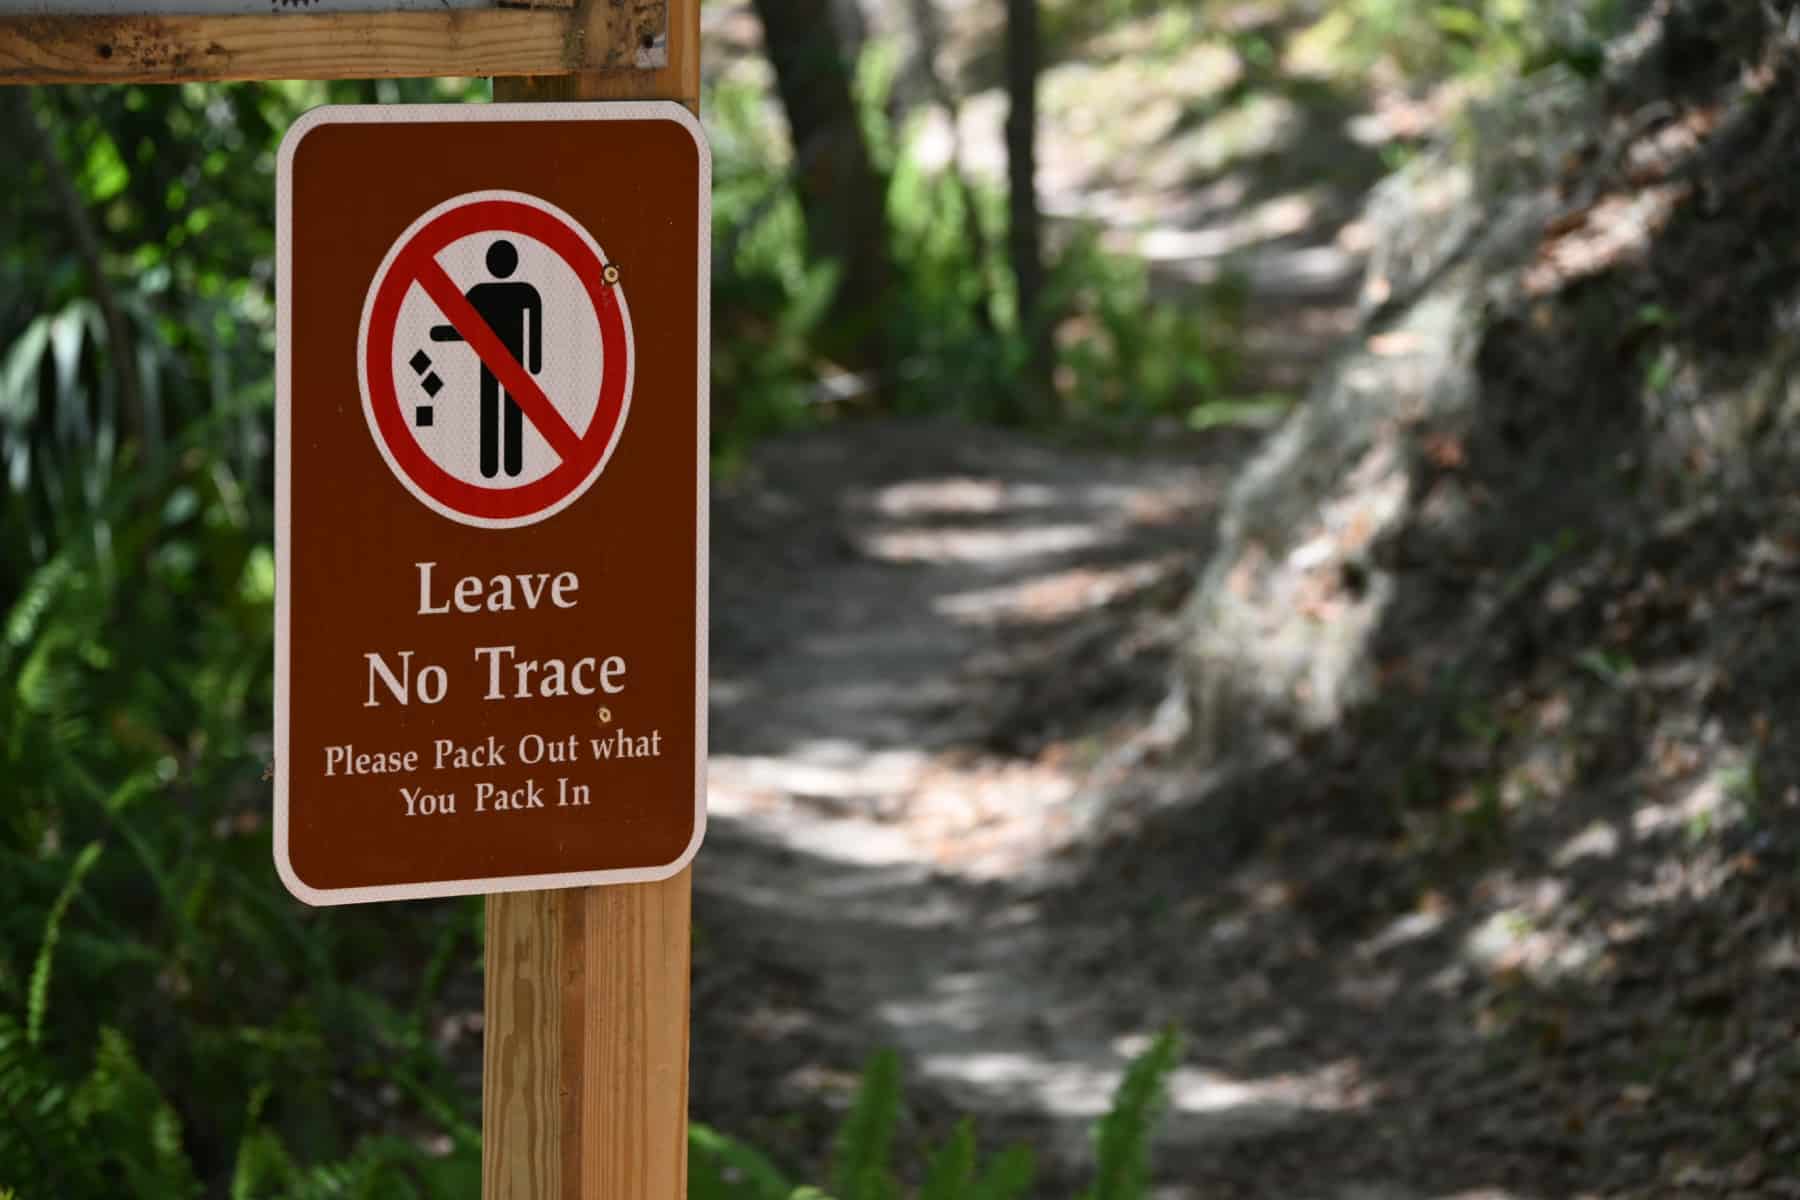 The 7 principles of leave no trace are shown on this forest sign reading "Leave No Trace. Please Pack out What You Pack In."